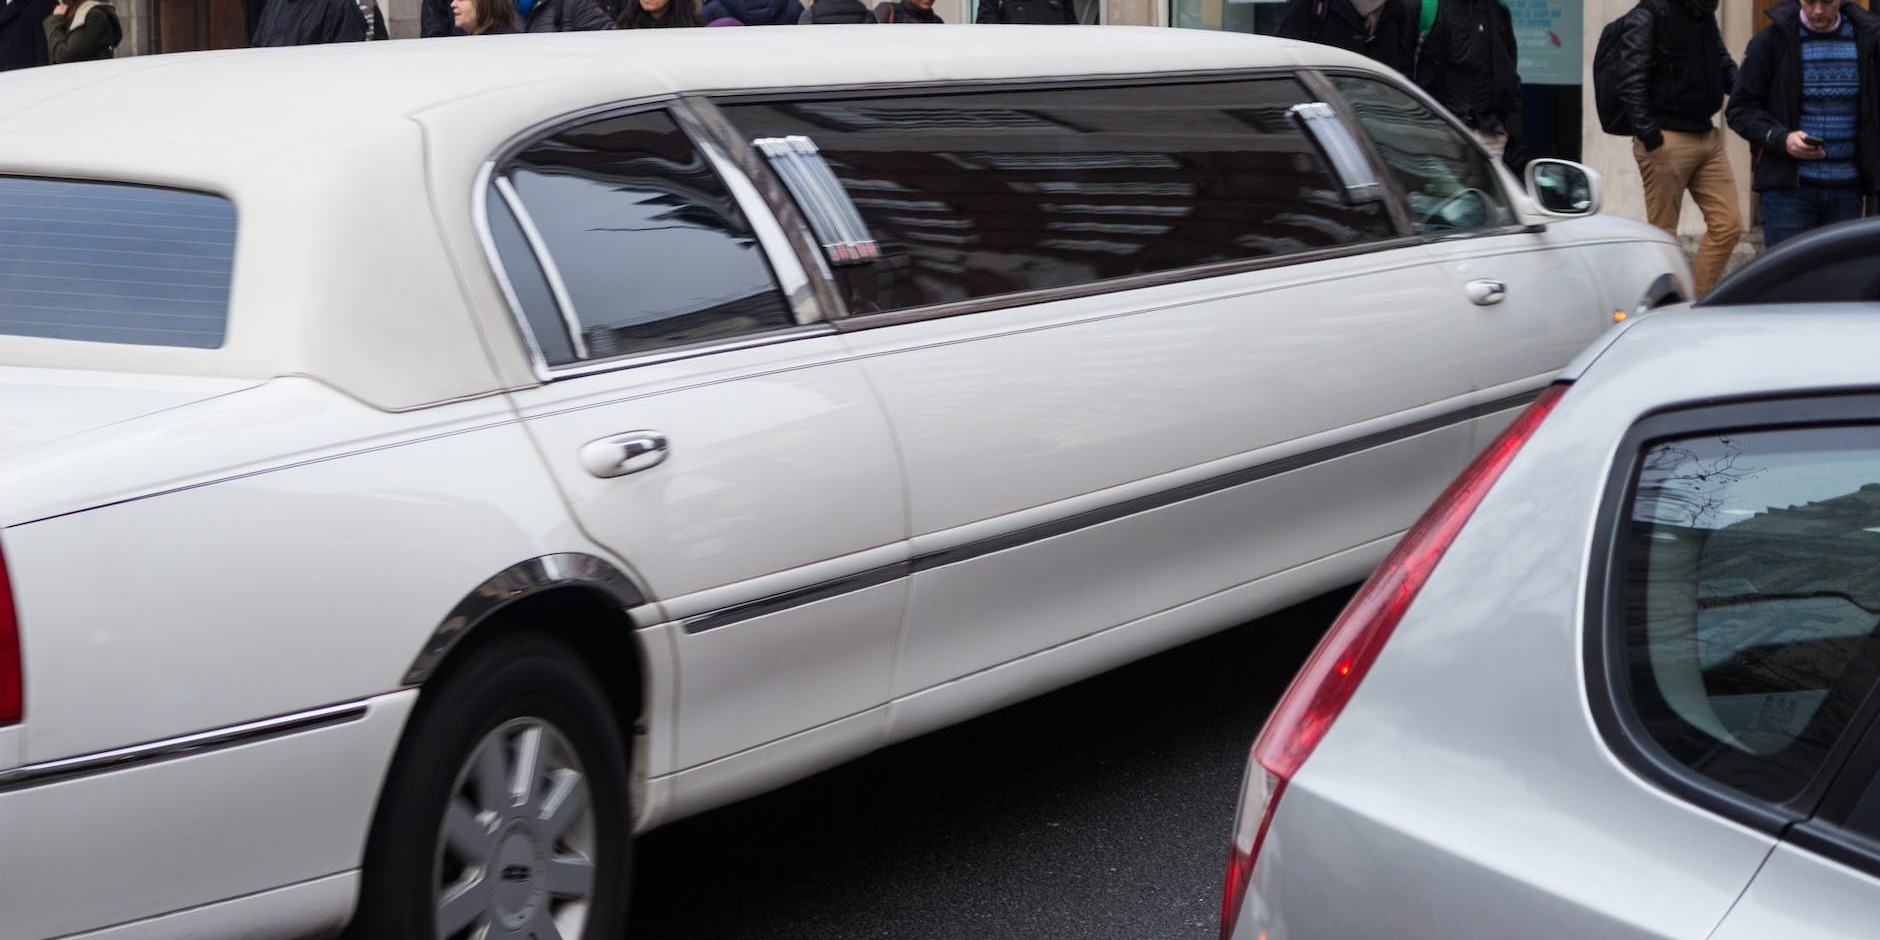 Top Tips for Booking a Limo Hire in London